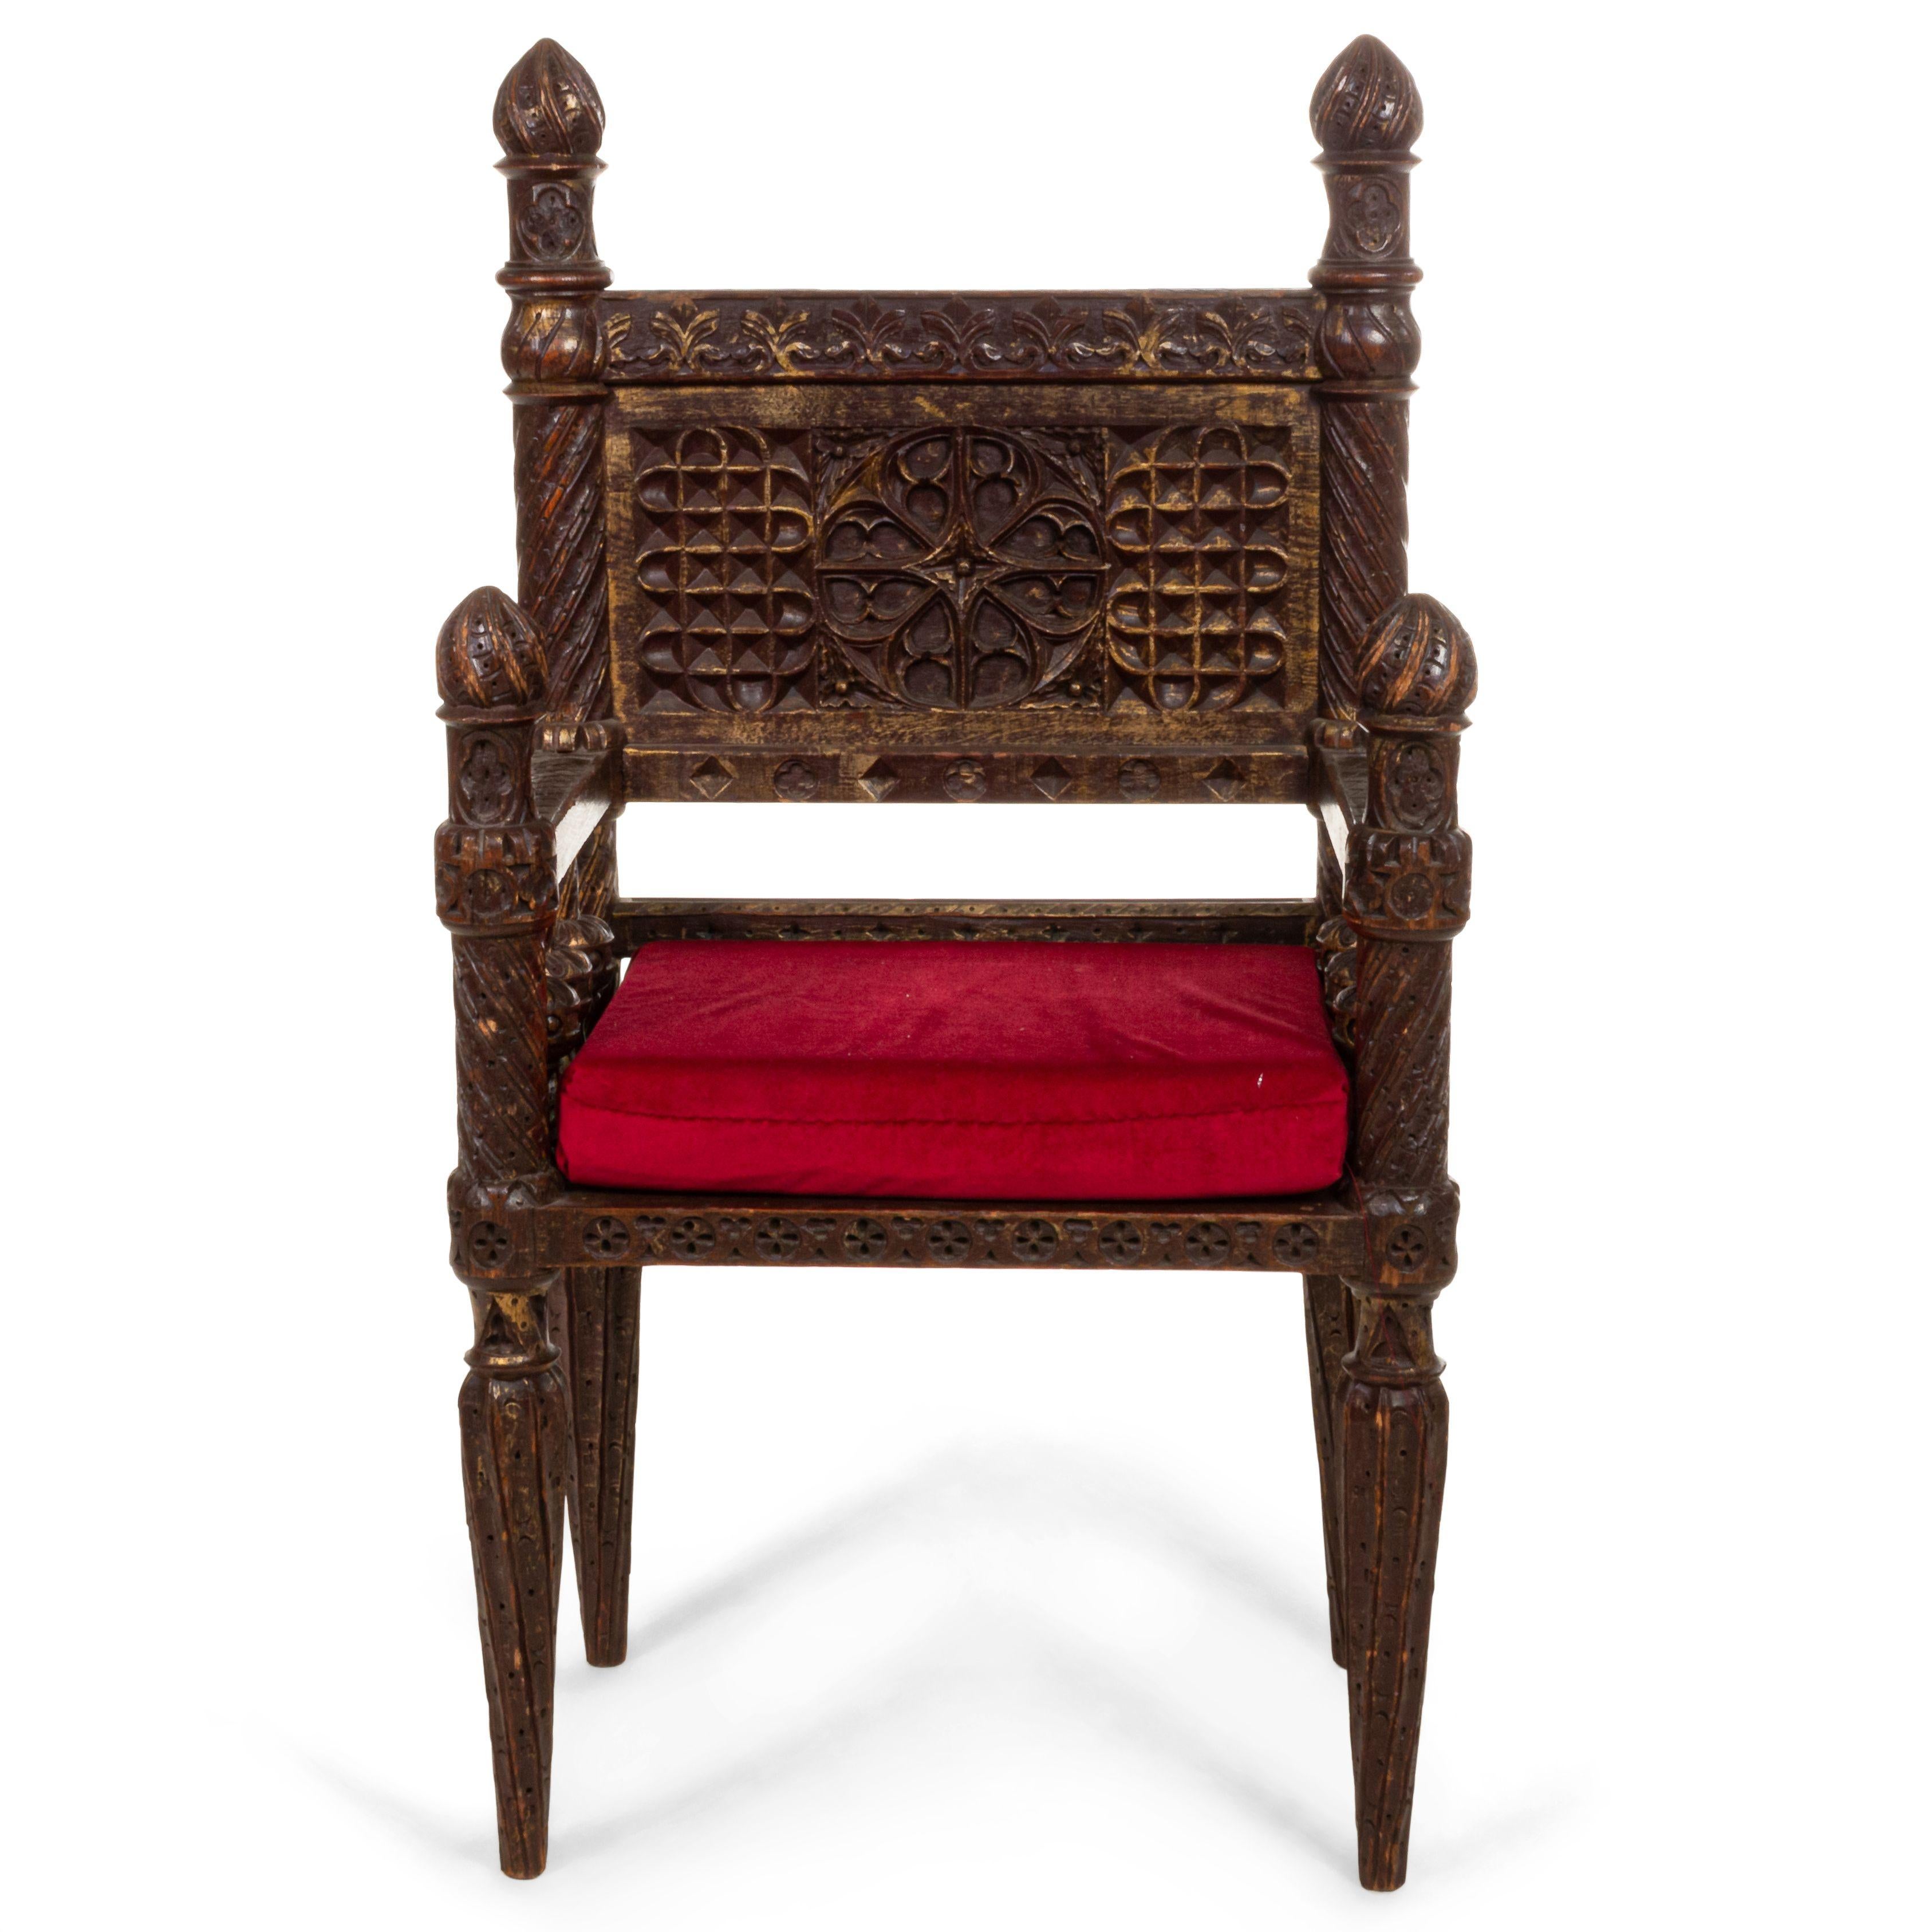 Gothic Revival Style 19th Century Burgundy Arm Chair For Sale 2